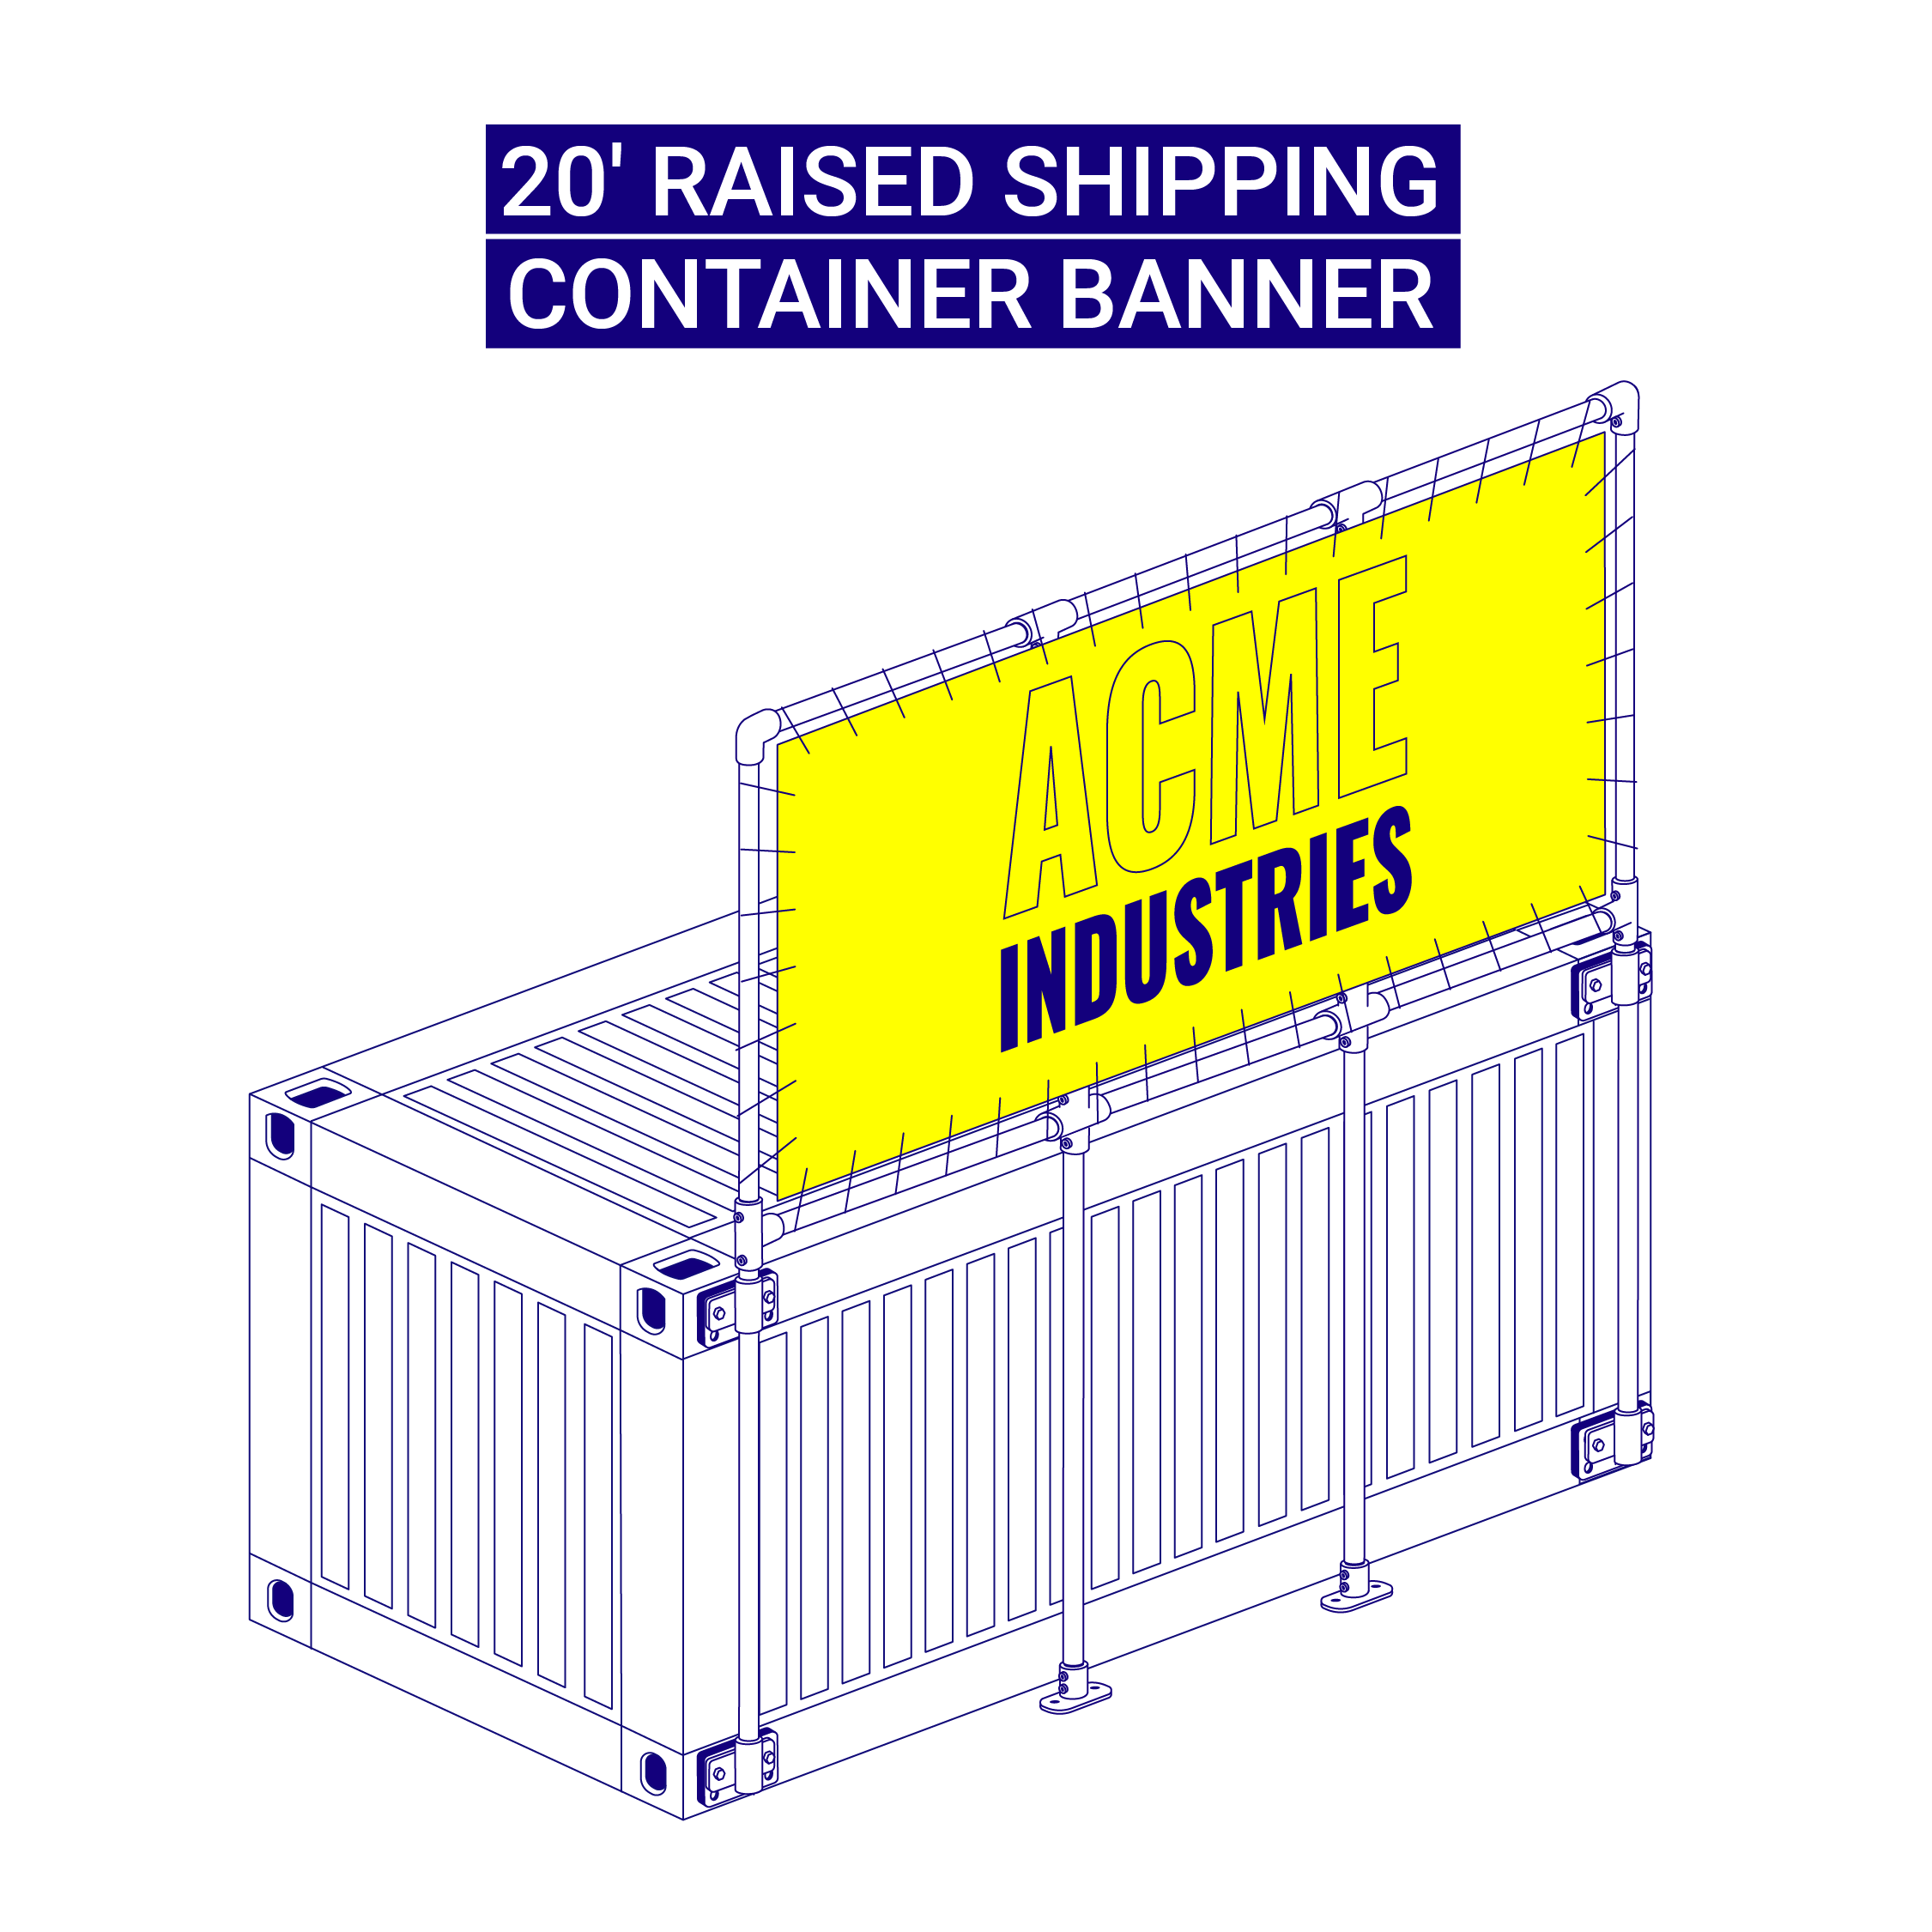 20 foot raised shipping container banner in situ